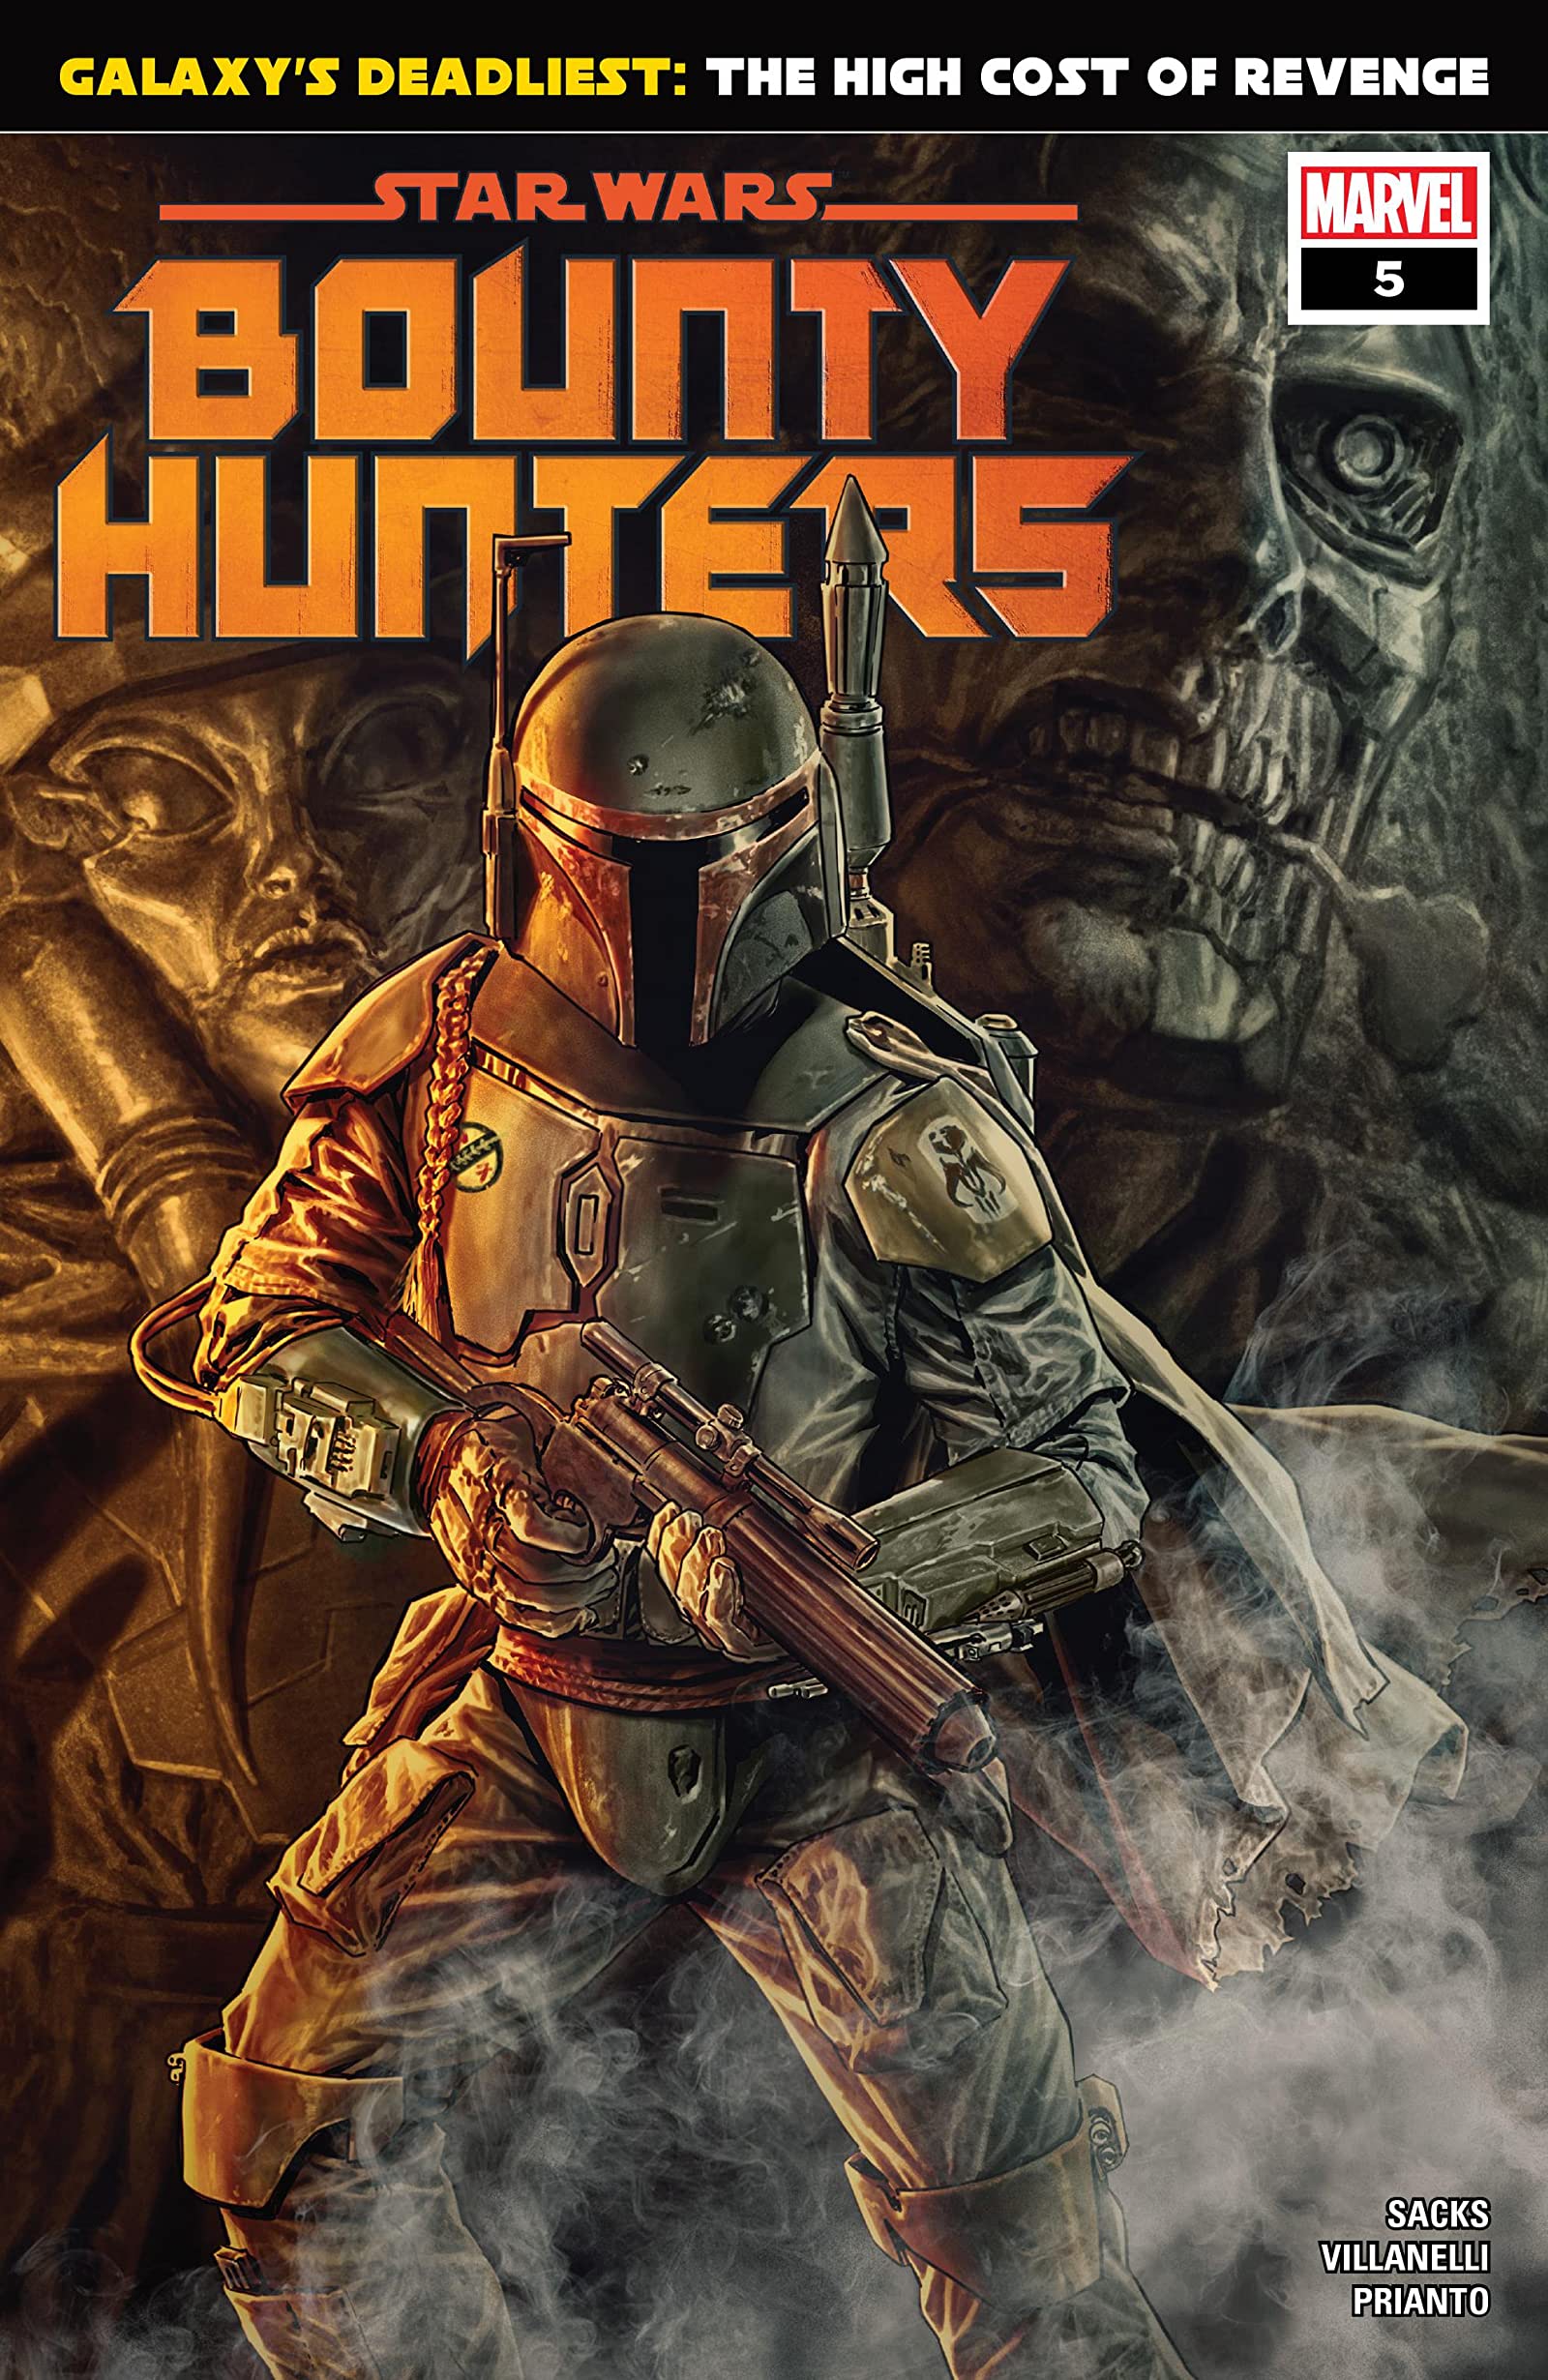 star wars bounty hunter game cancelled